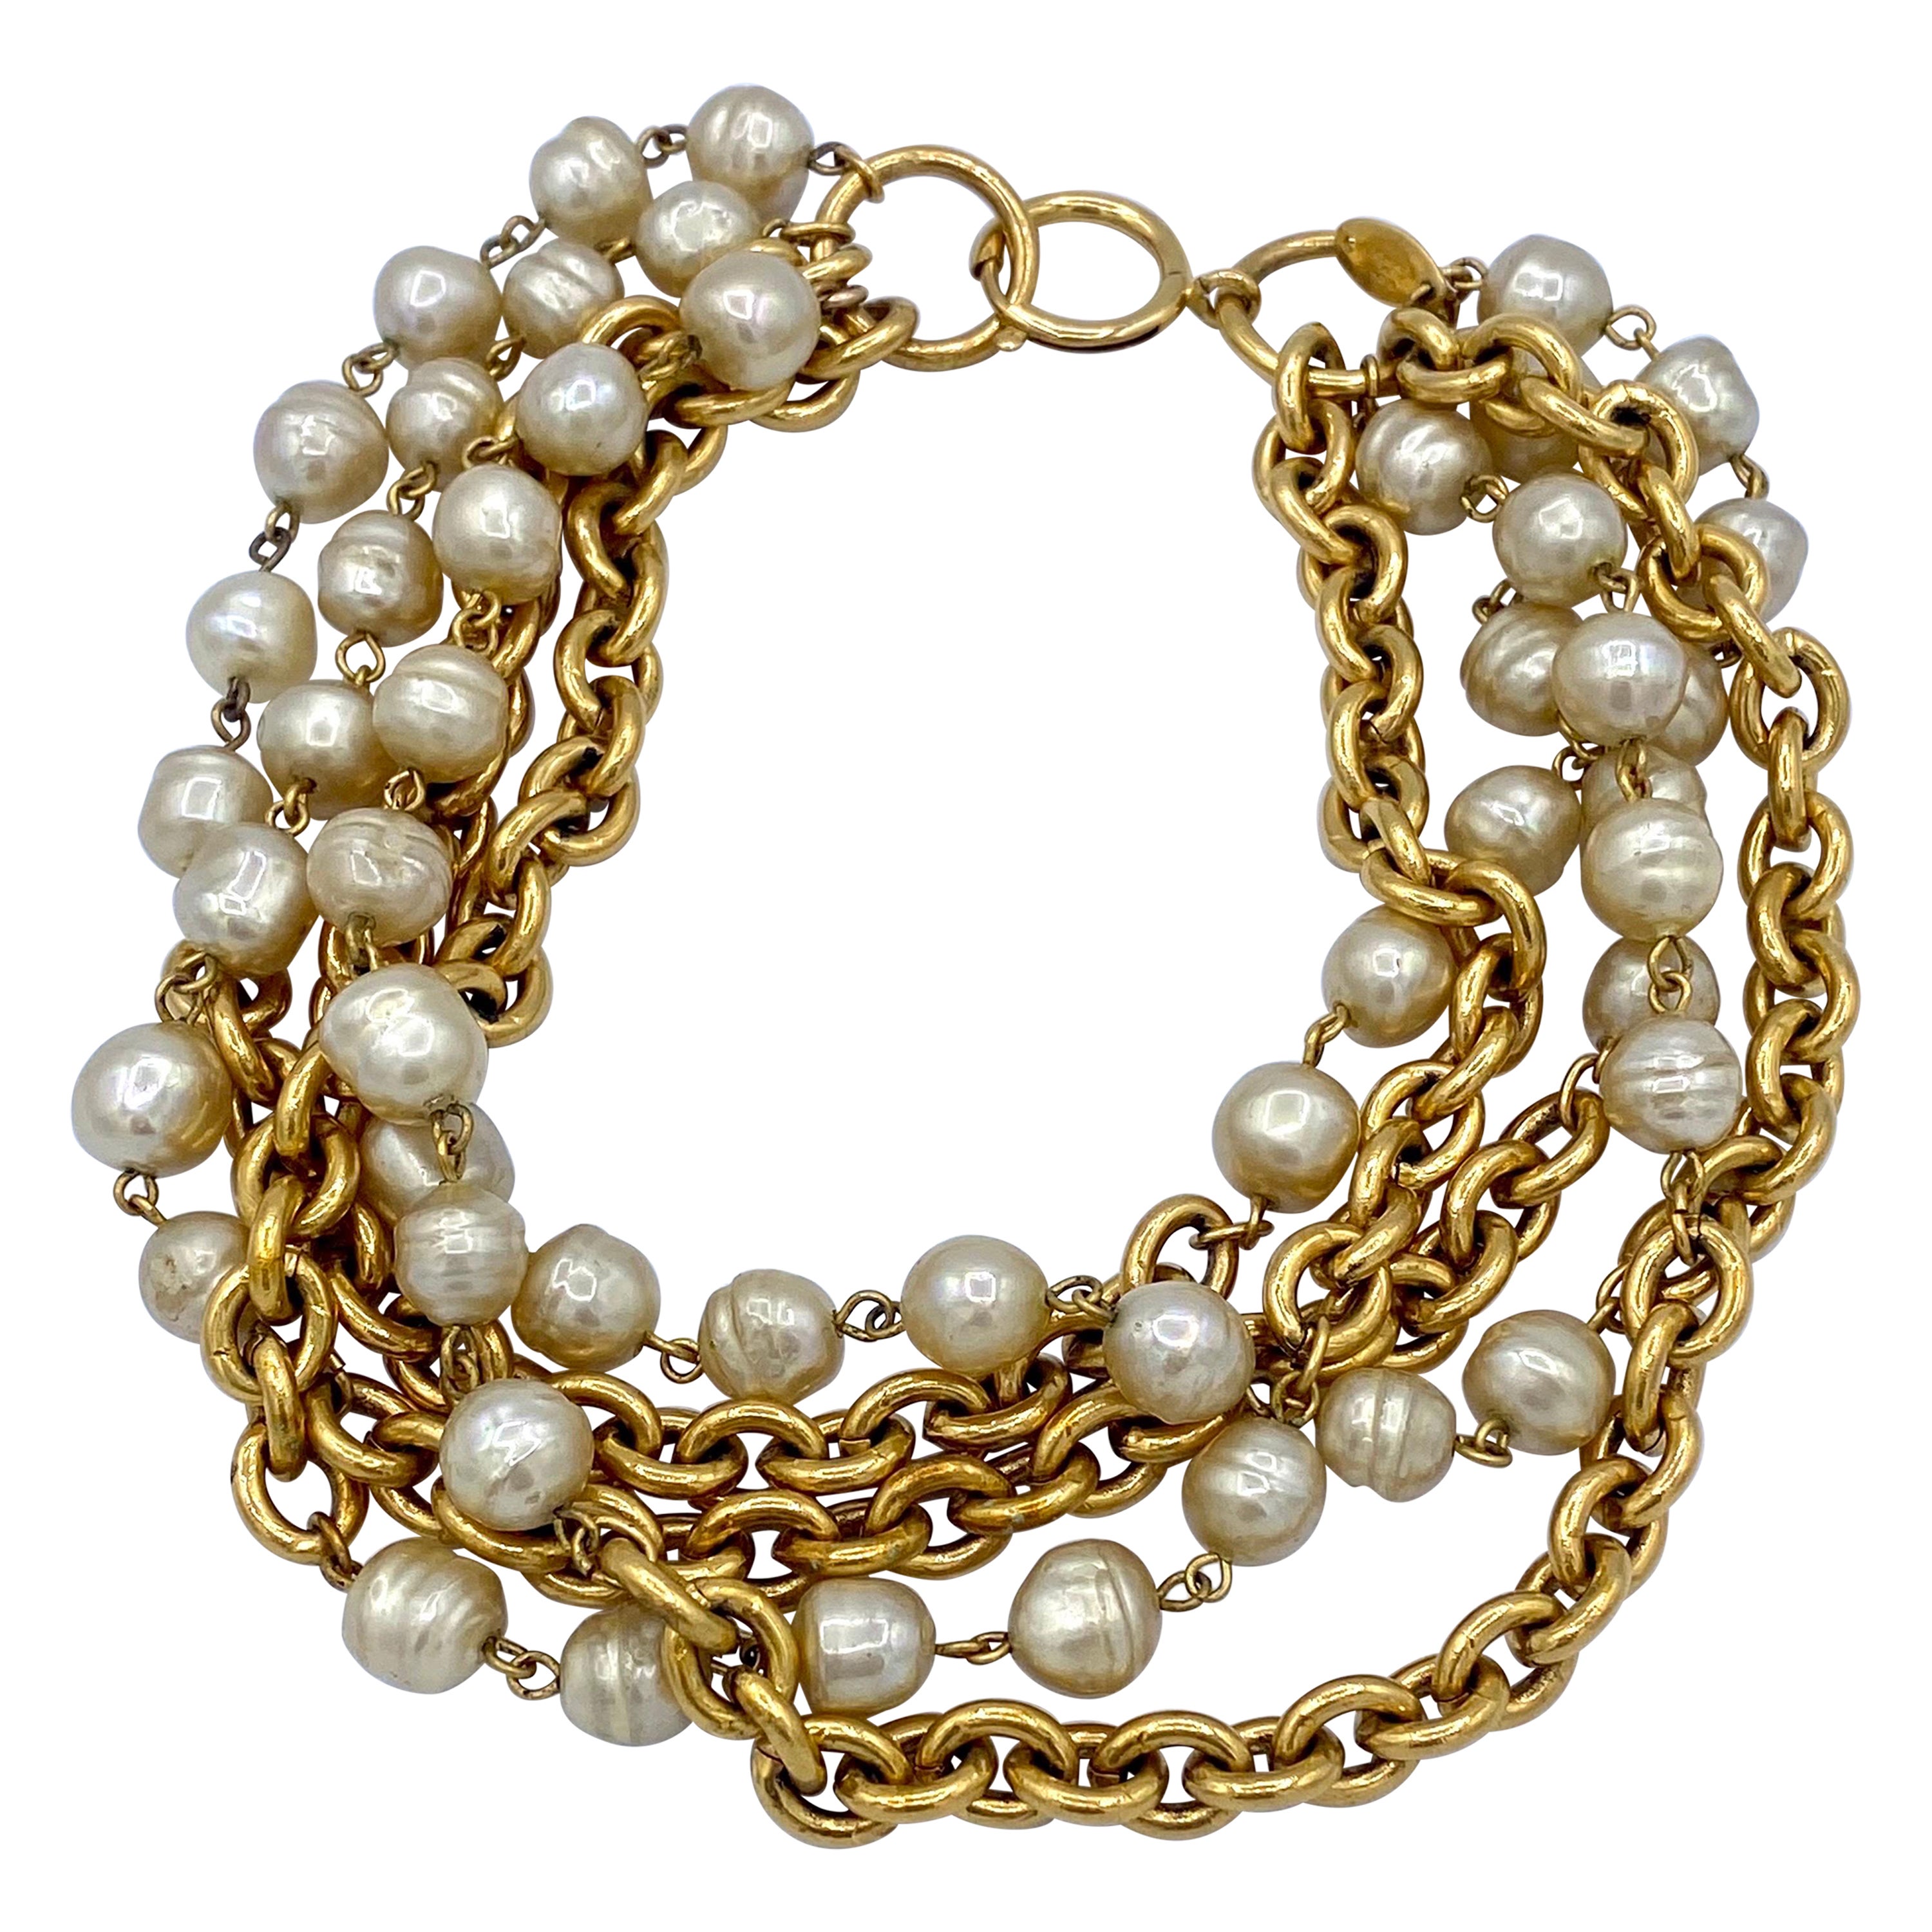 Vintage Chanel pearl choker necklace from 1985